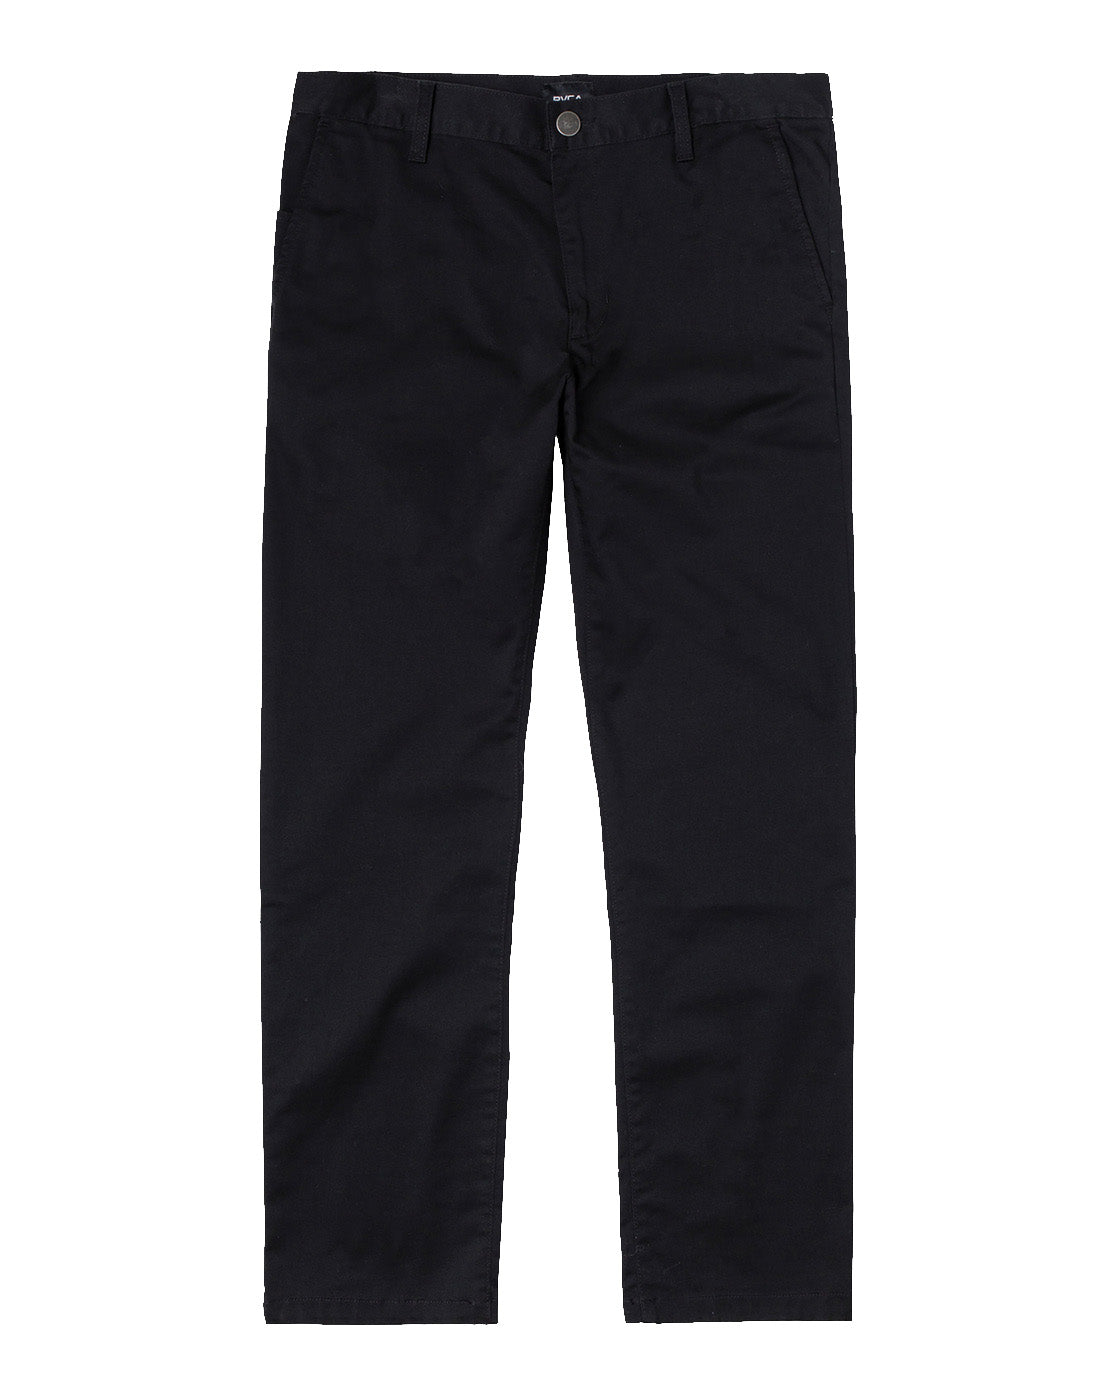 RVCA The Weekend Stretch Pant BLK 34